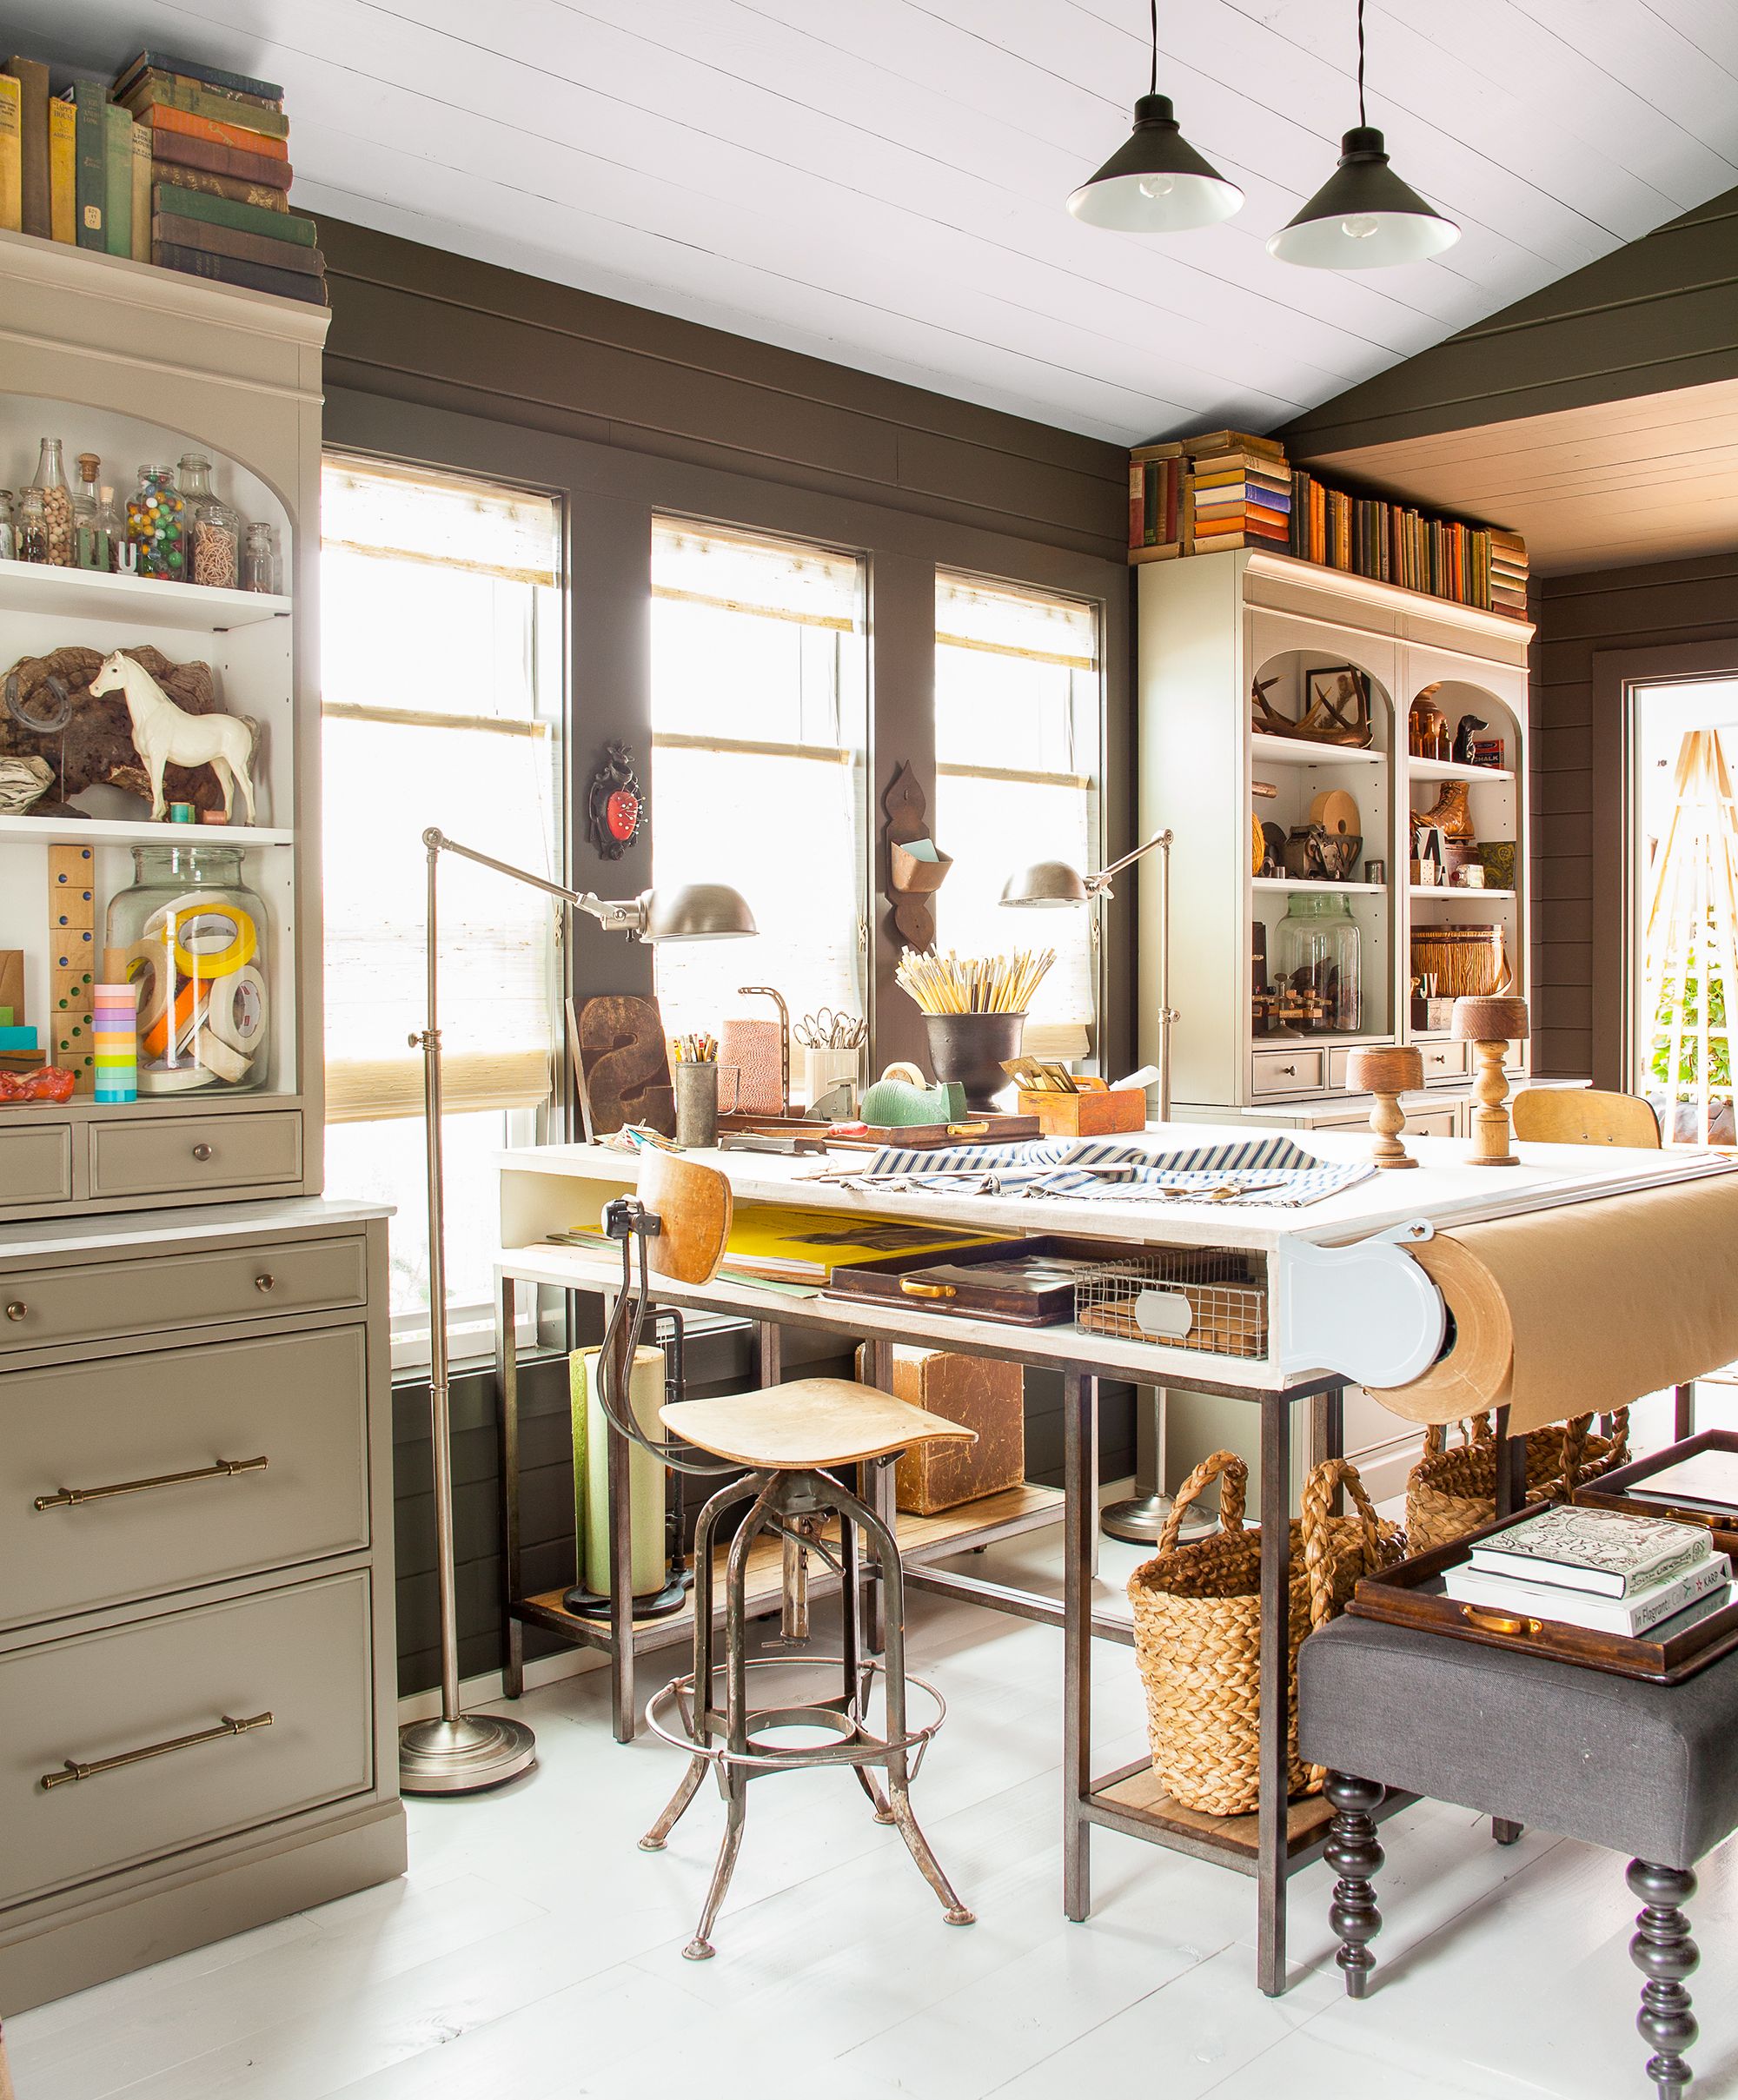 16 Best Craft Room Ideas - Craft and Sewing Room Organization